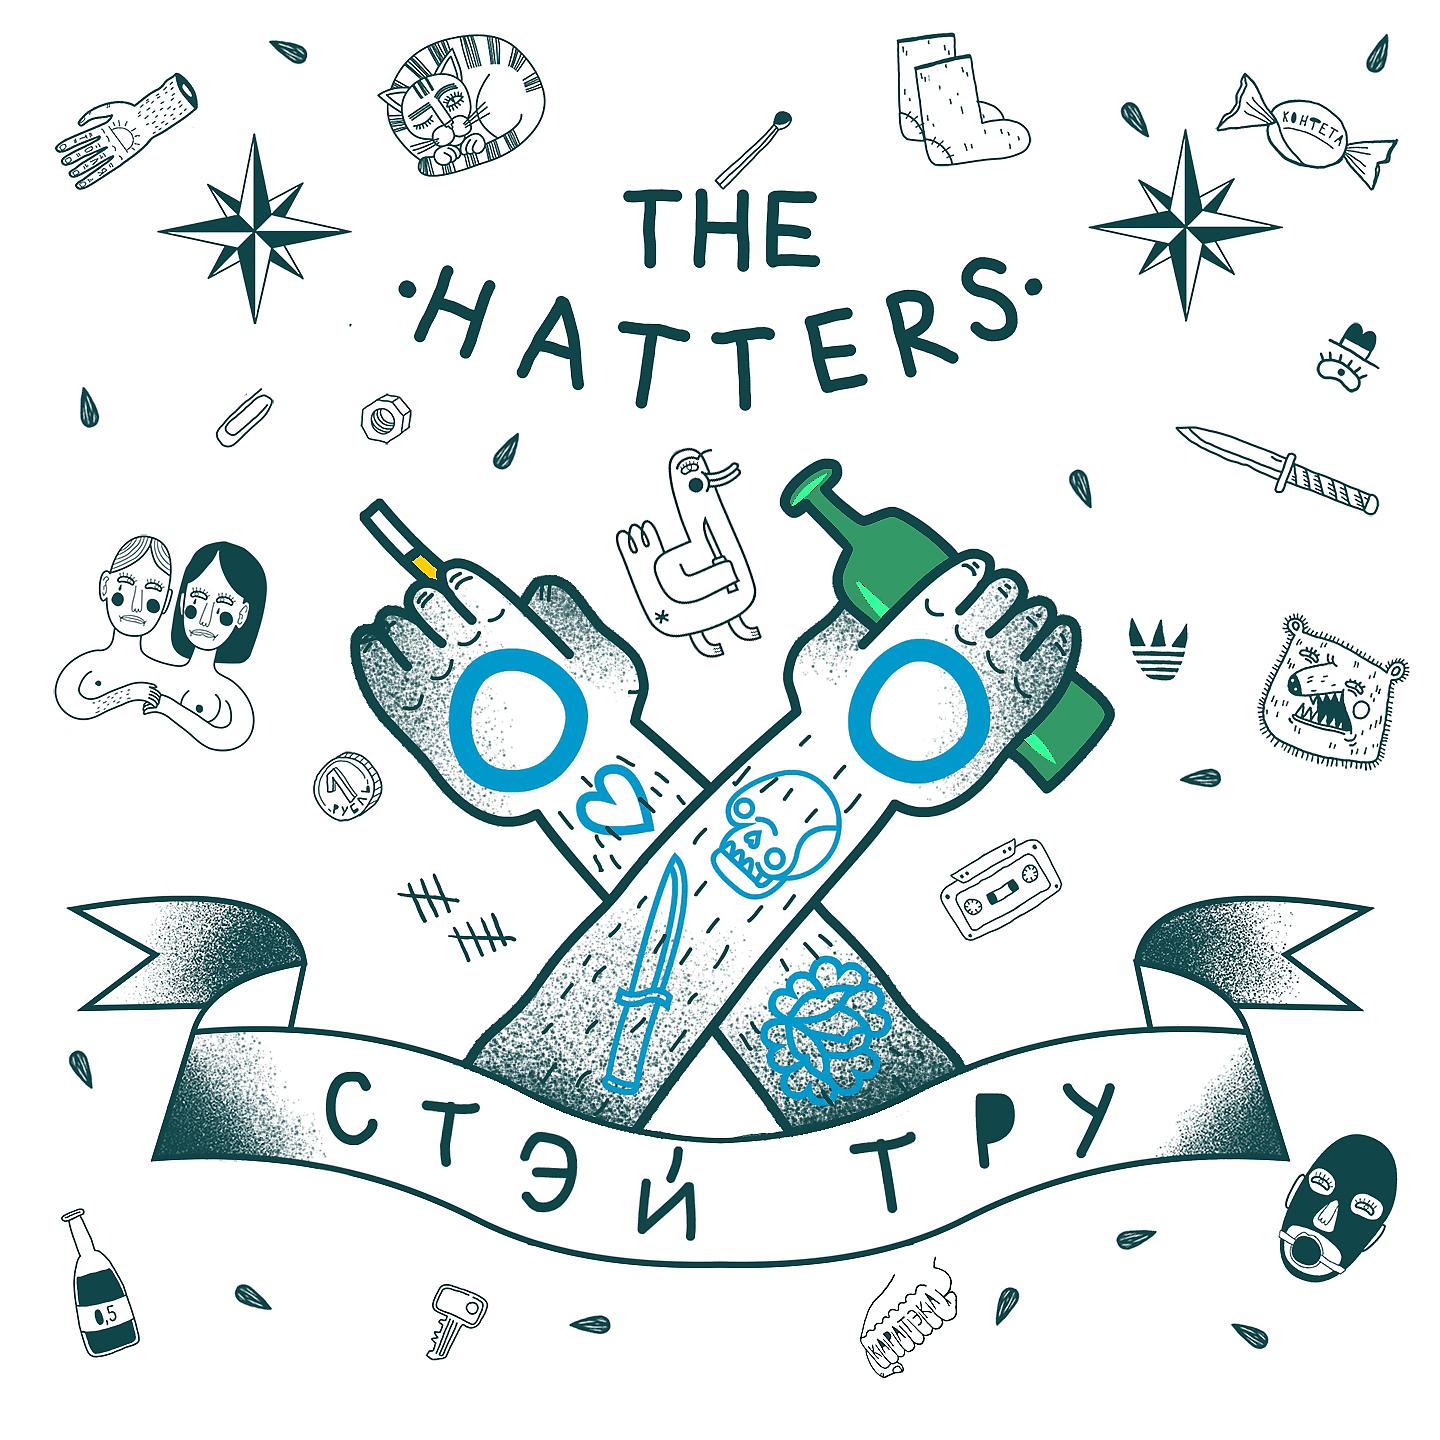 The Hatters - Слово пацана